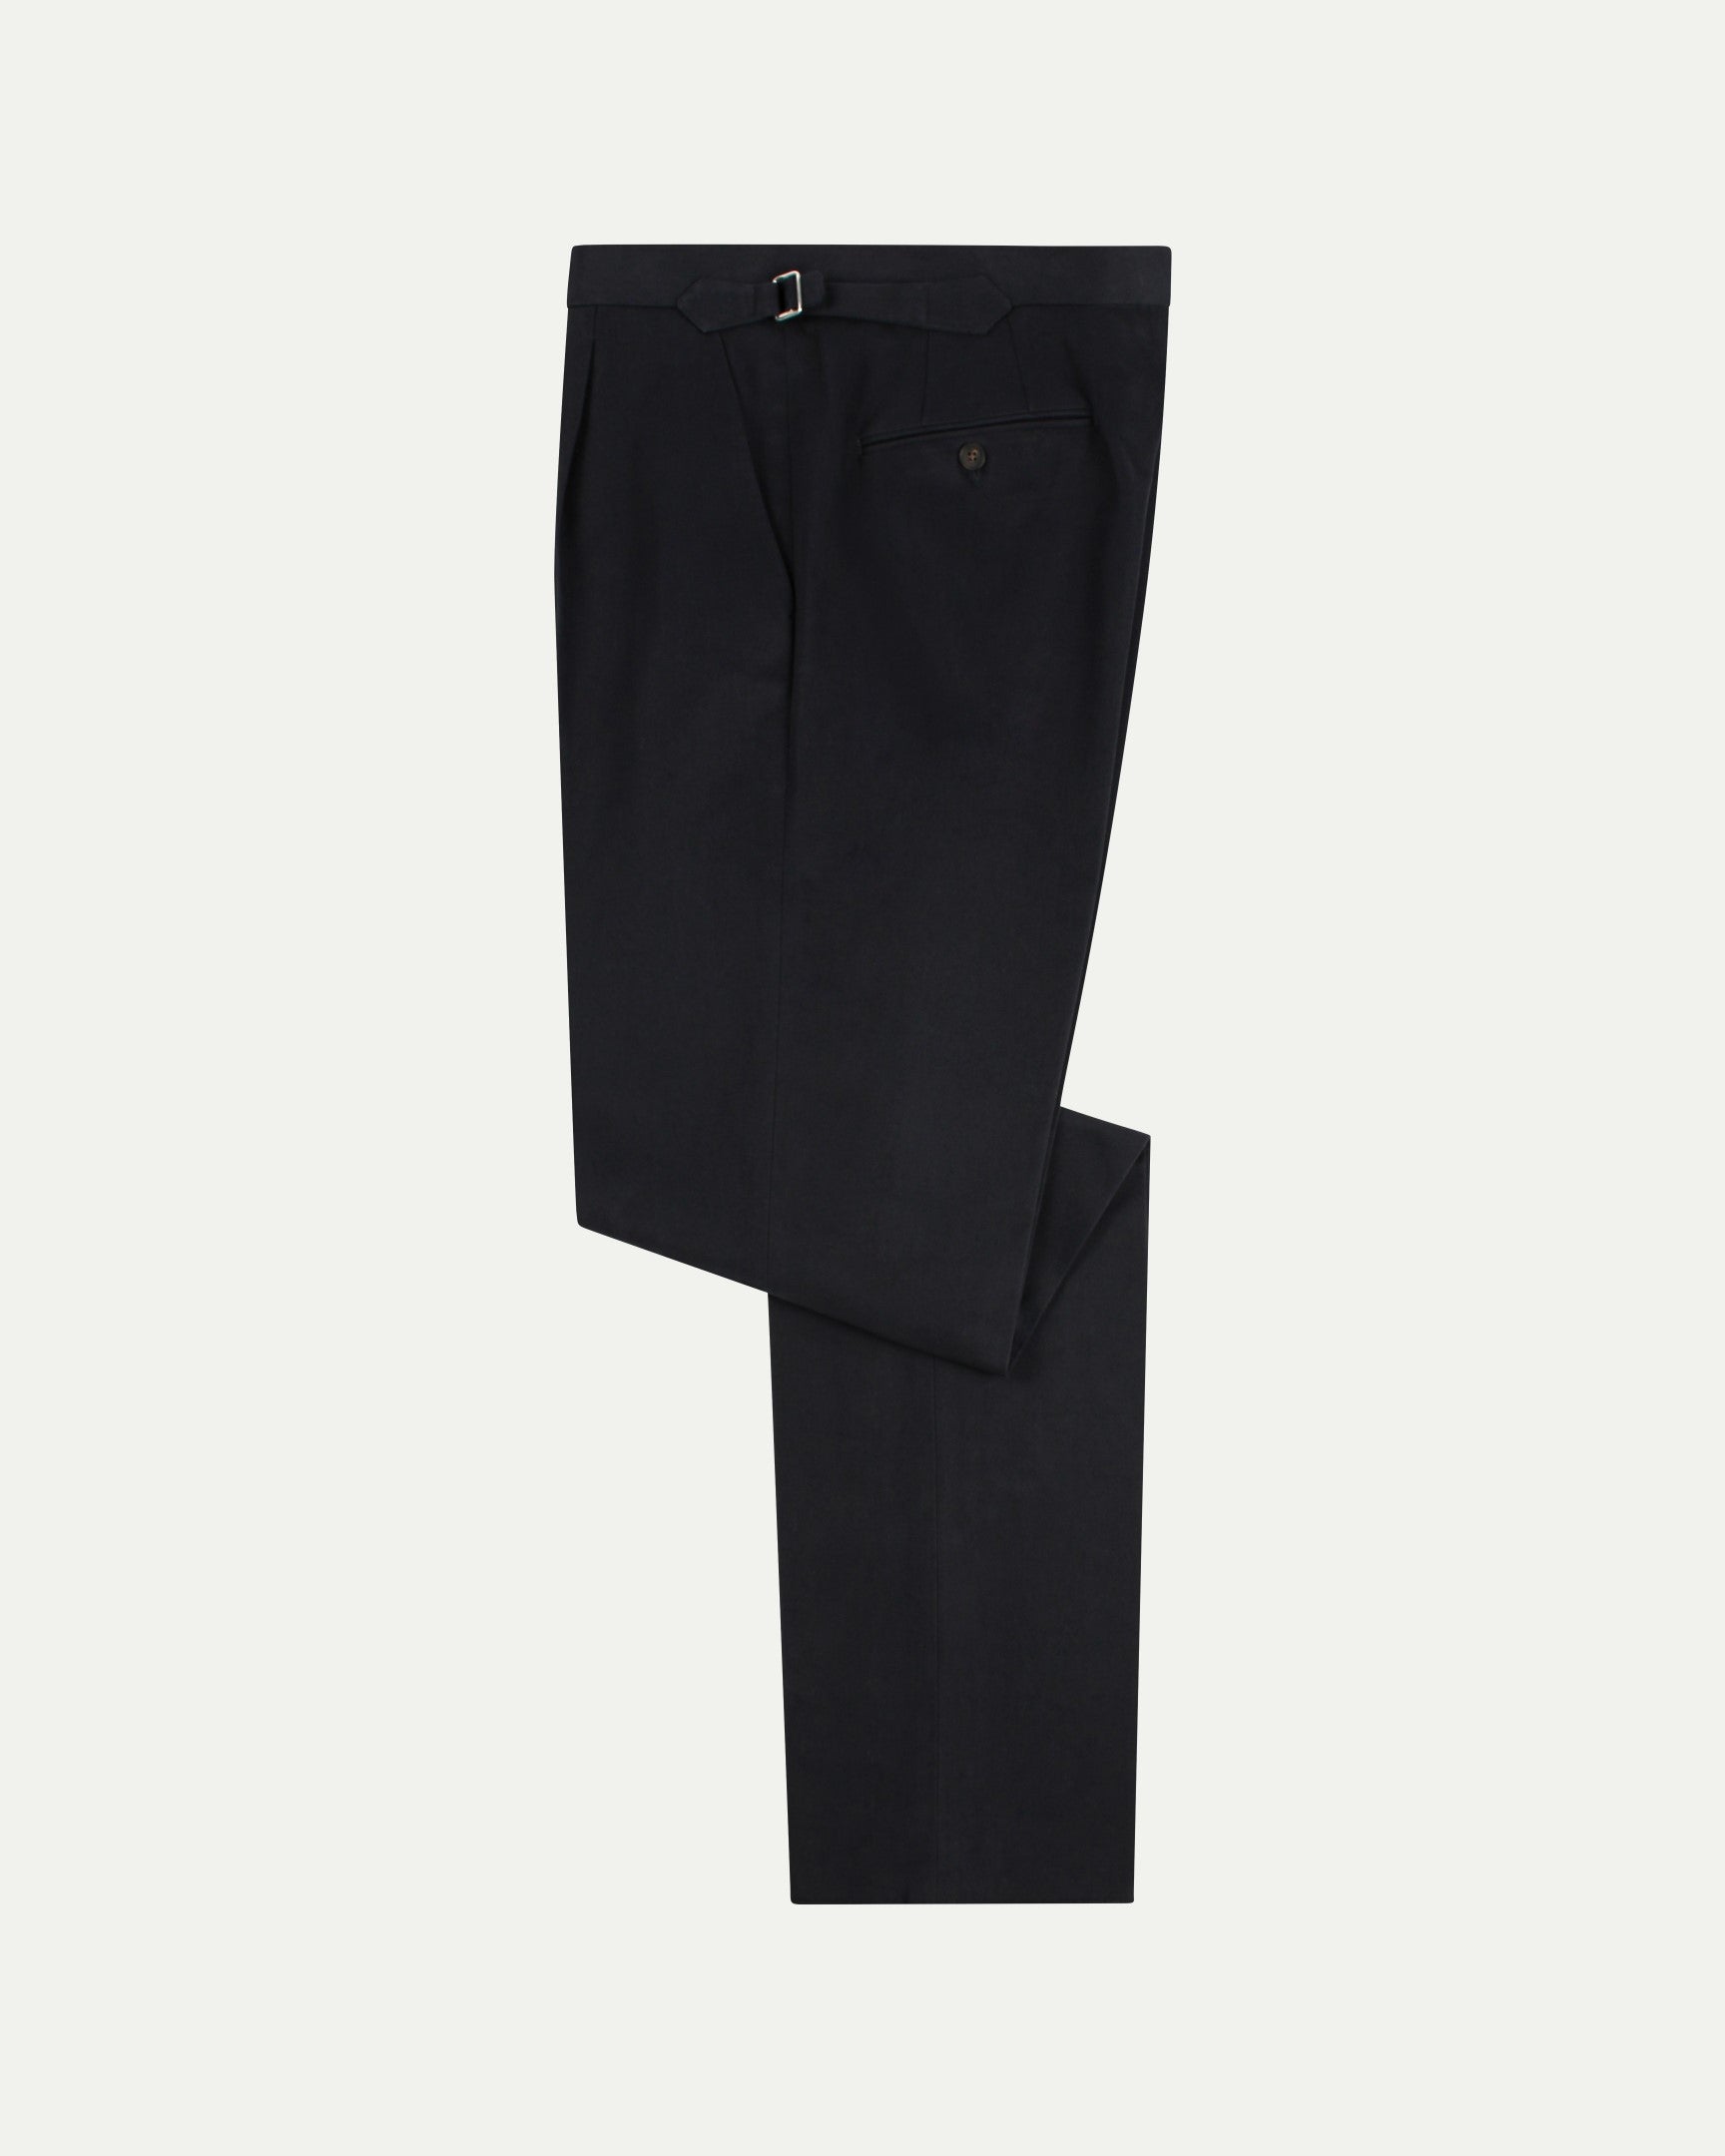 Made-To-Order Trousers in Navy Cotton Drill